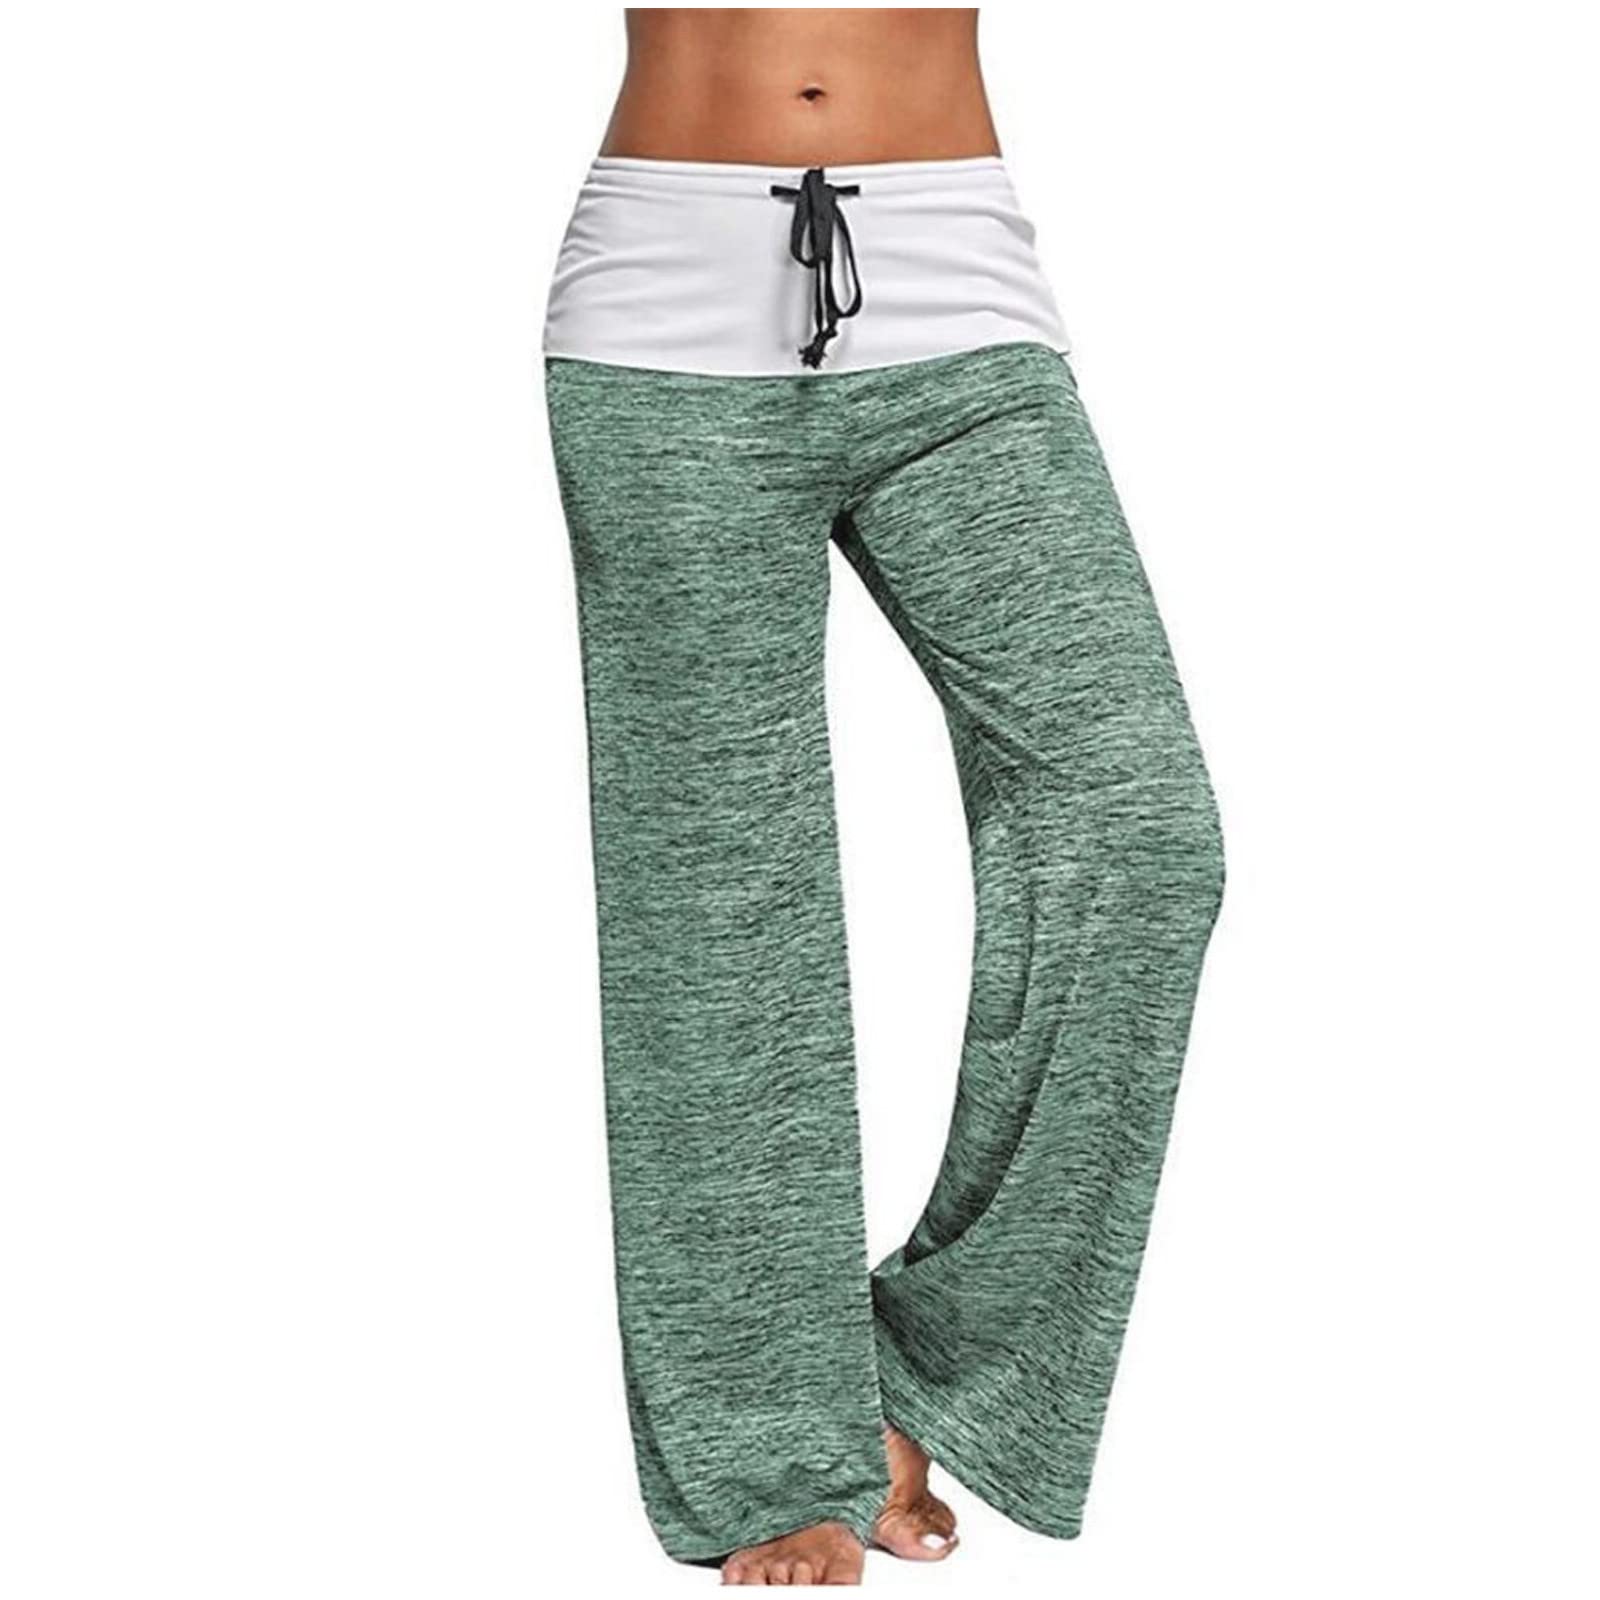 Promo Codes for Today Athletic Leggings for Women with Pockets Womens Drawstring Elastic Waist Palazzo Pants Bell Bottom Pants Flare Leg Bootcut Sports Yoga Activewear Pants Green L